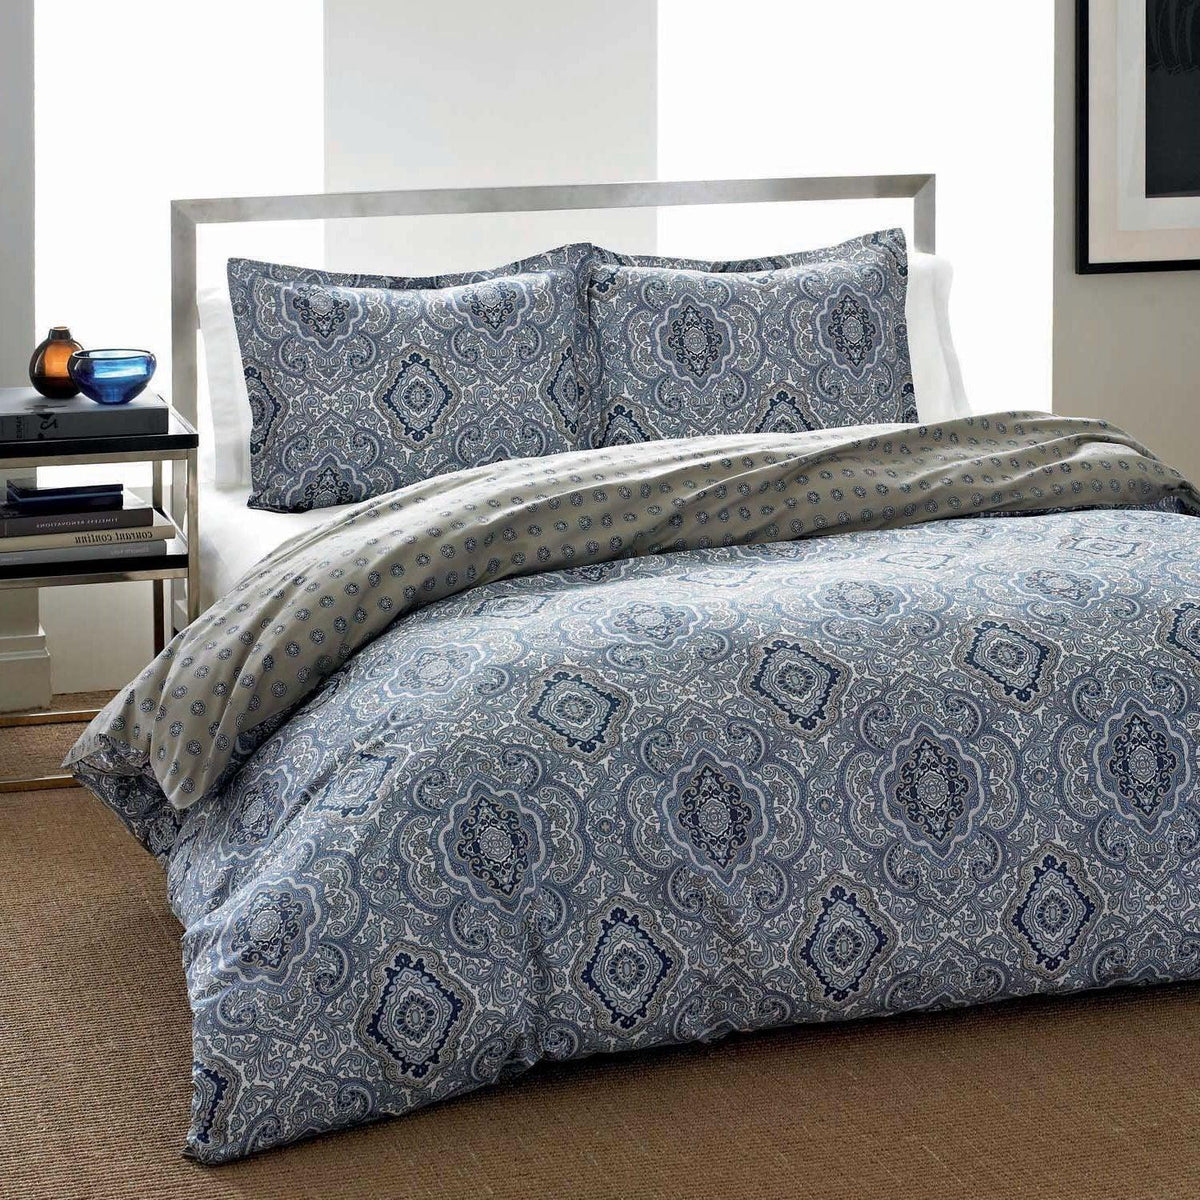 Twin size 2-Piece Cotton Comforter Set with Blue Gray Medallion Pattern